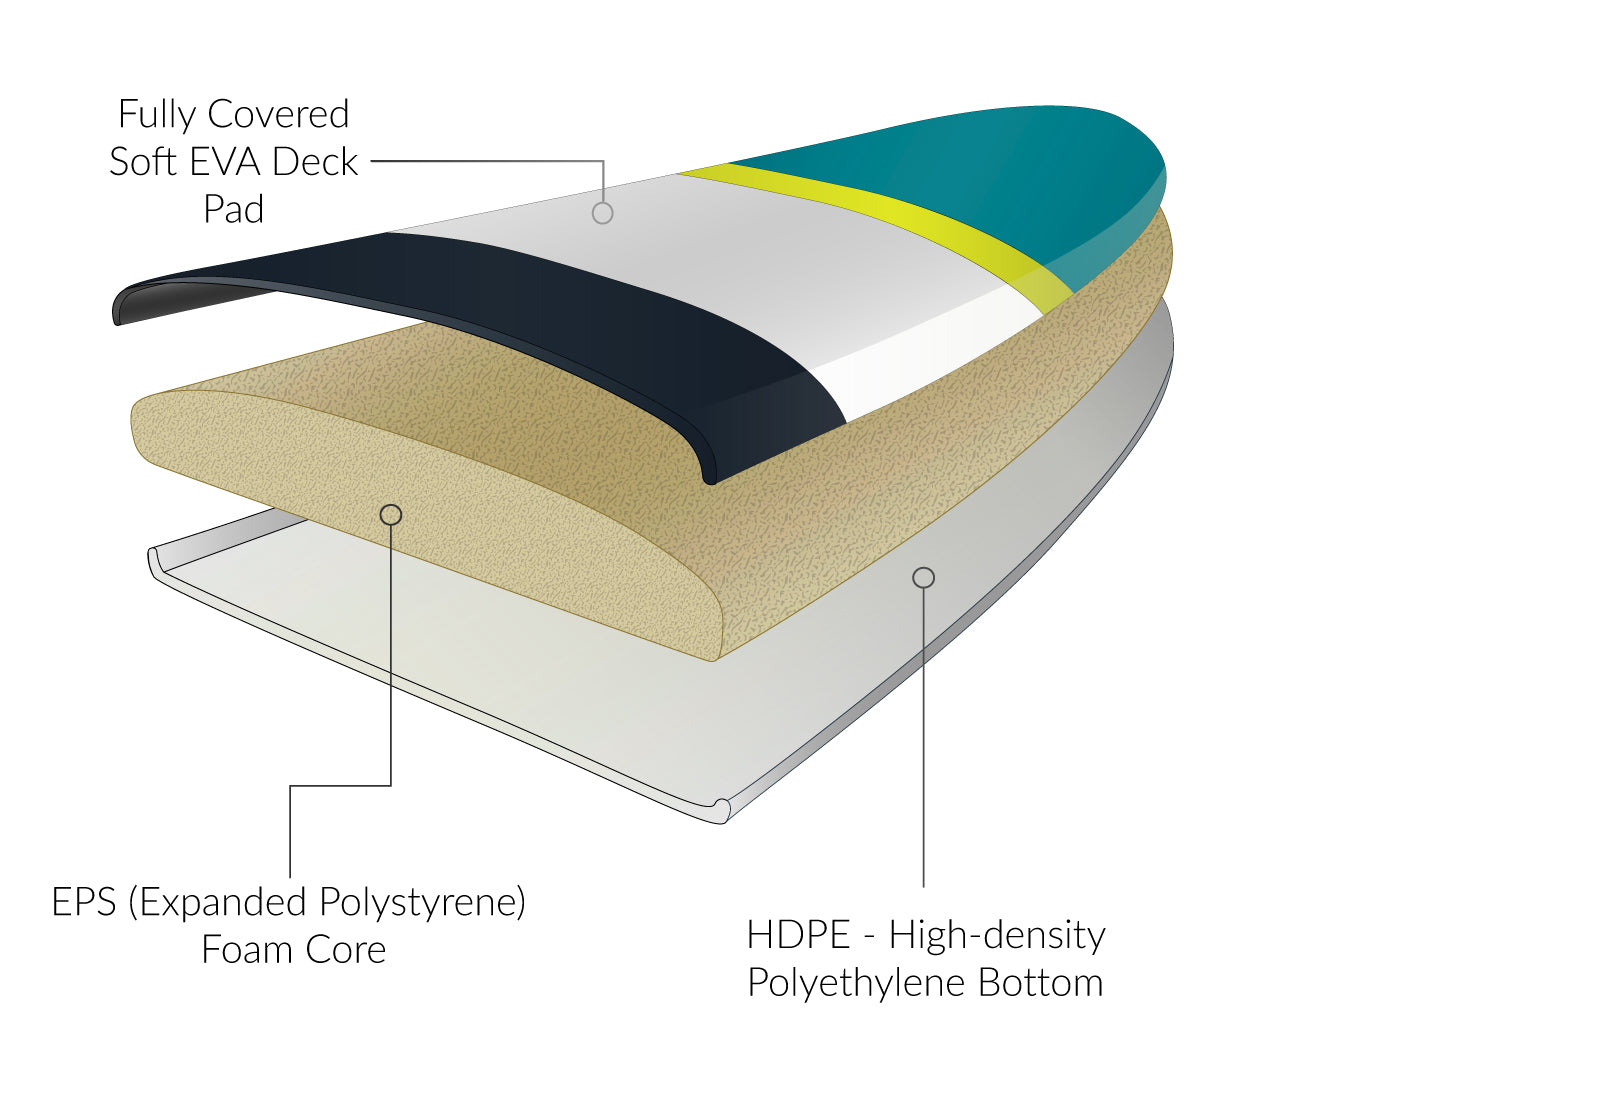 HDPE technology graphic